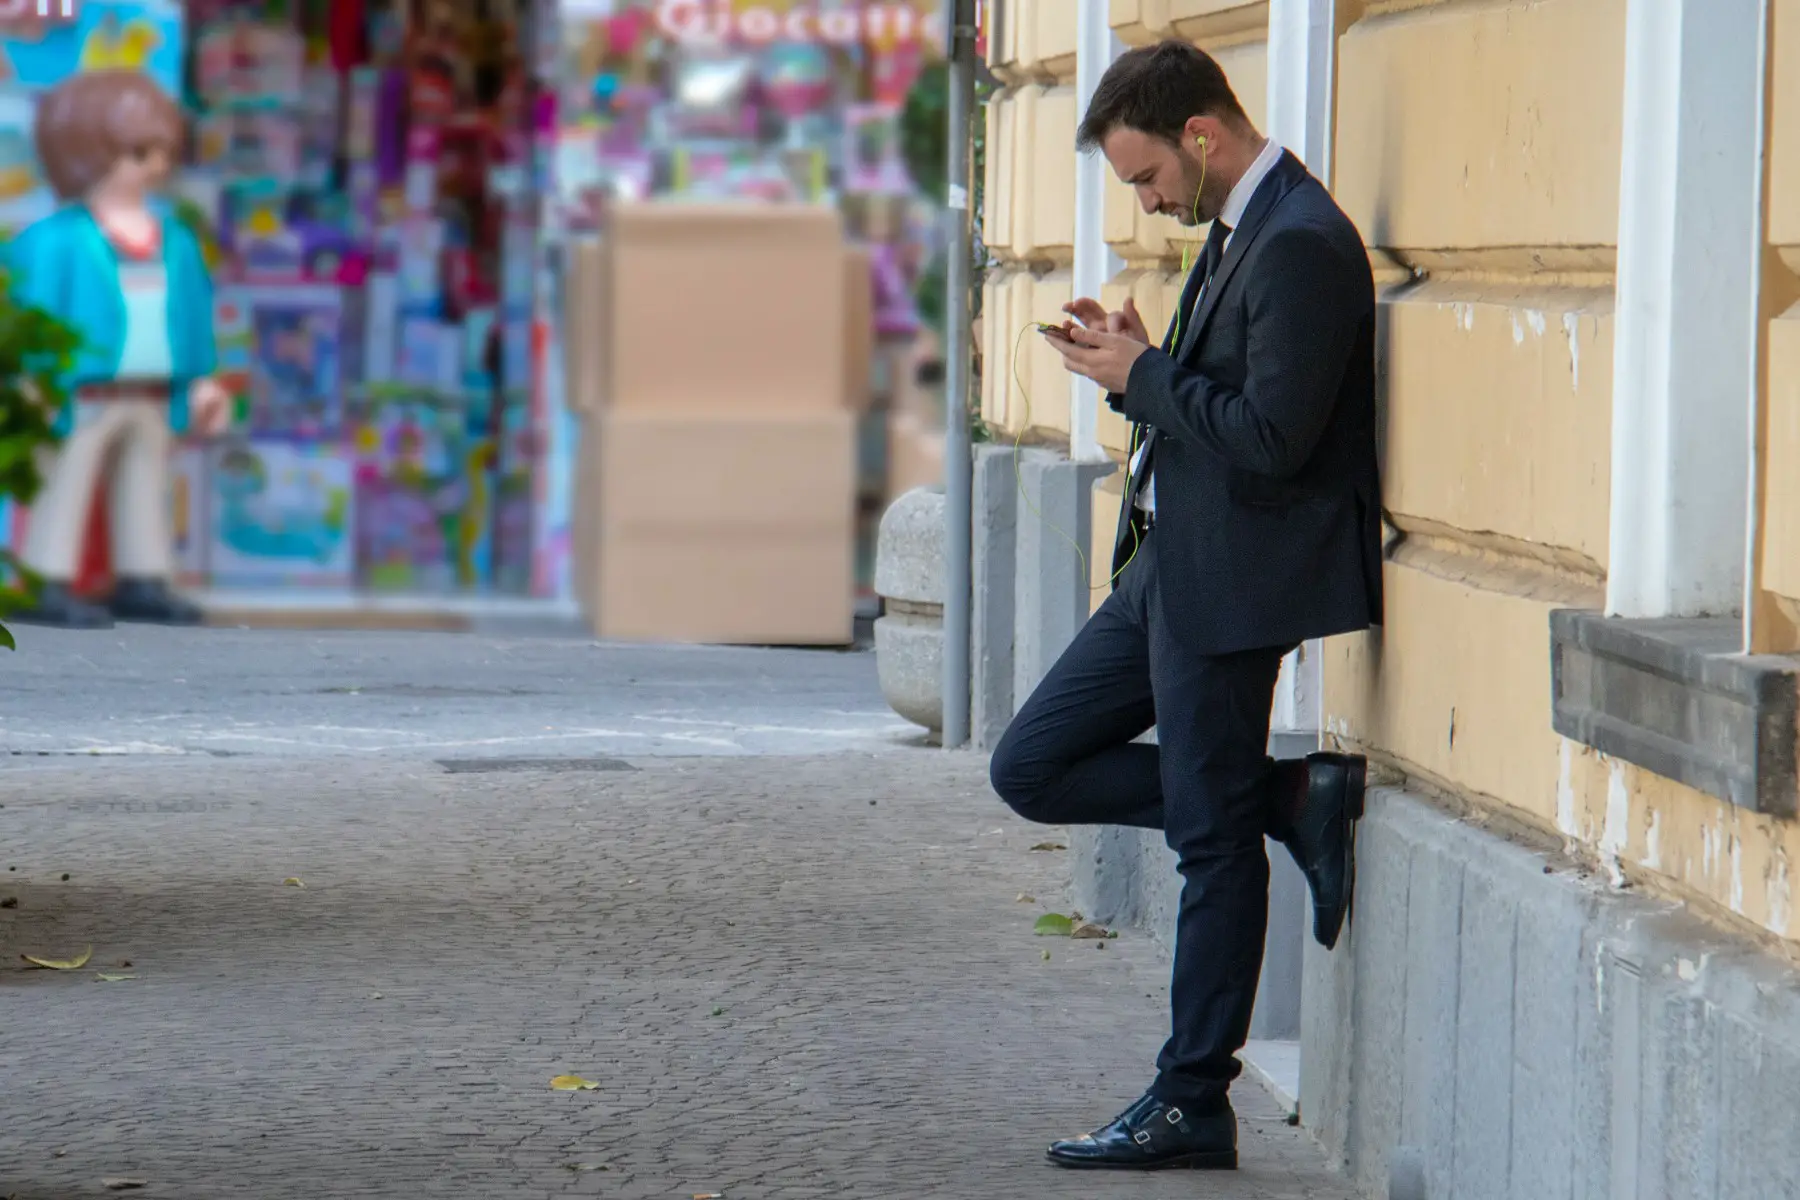 A man in a suit with earbuds in, leans against a wall in Sorrento (Italy), staring intently at his smartphone.